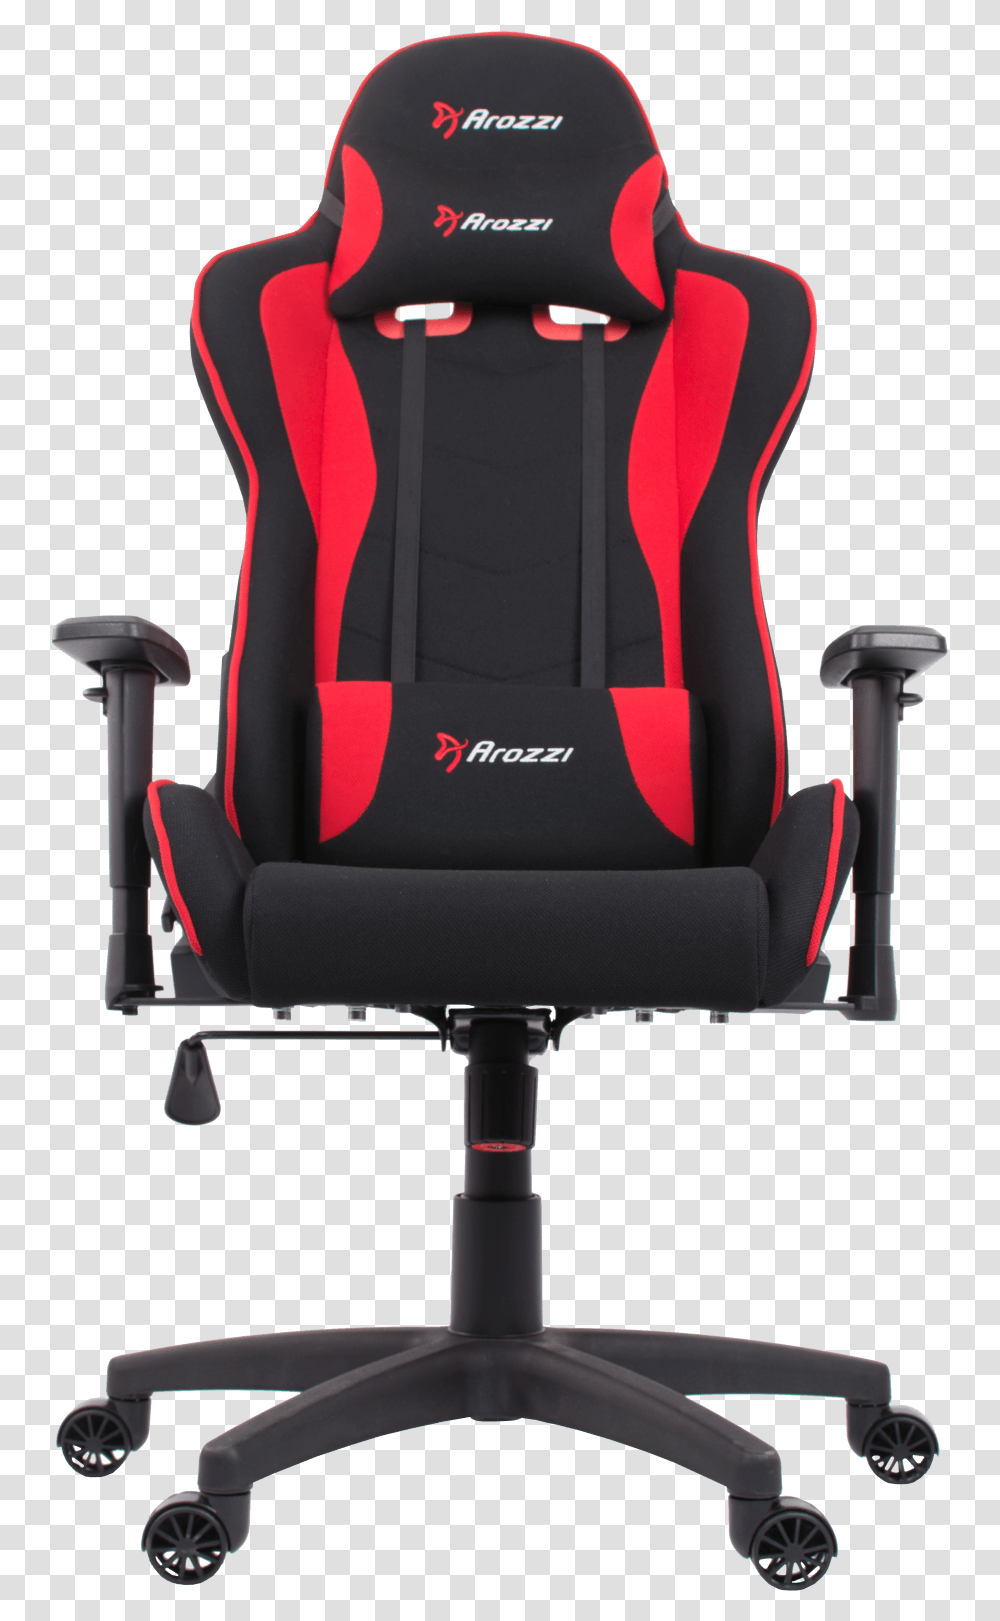 Gaming Chair Price In Pakistan, Furniture, Cushion, Car Seat, Headrest Transparent Png